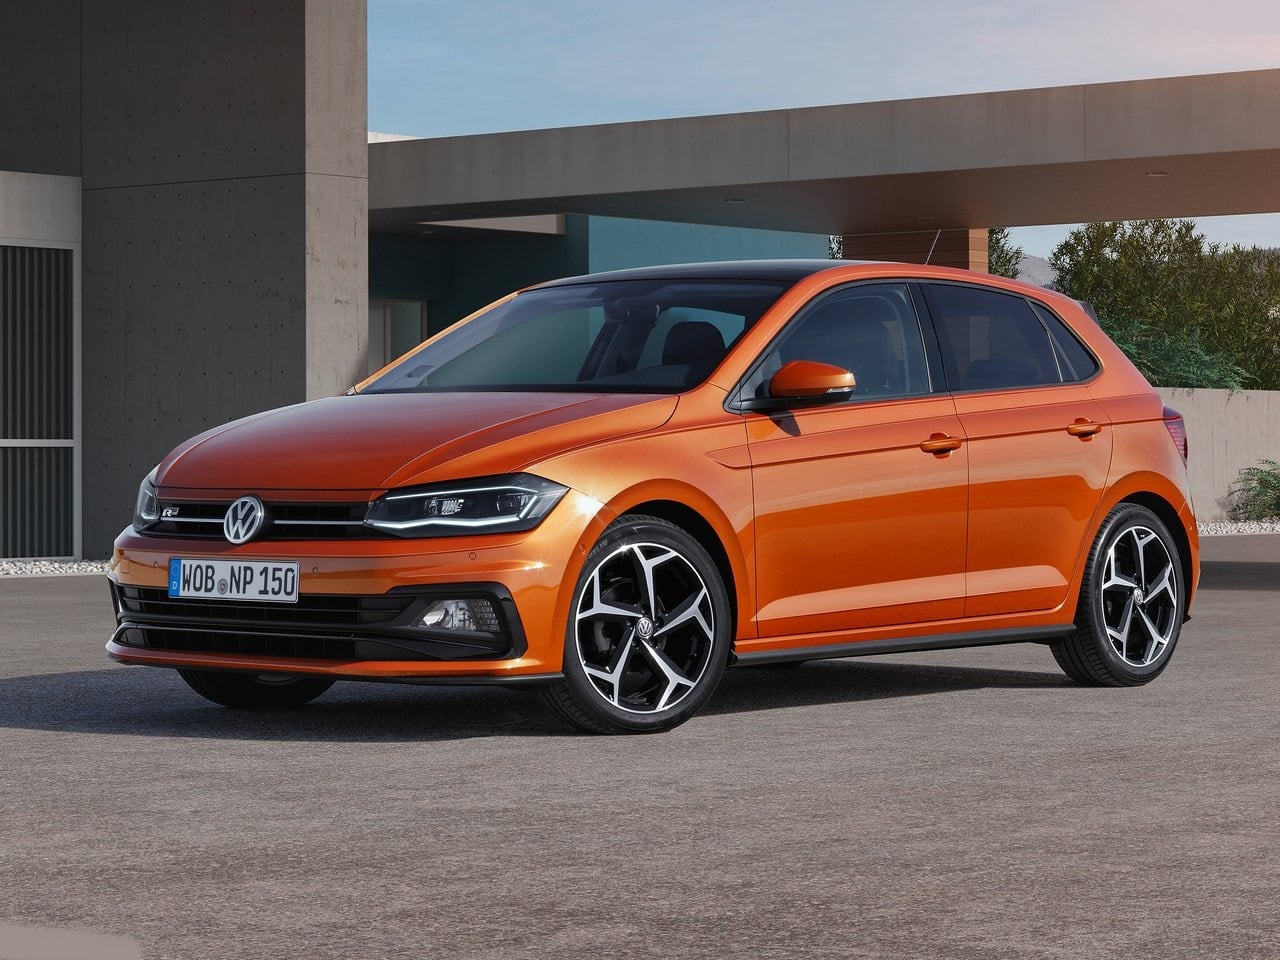 New 2018 Volkswagen Polo India Launch Date, Price